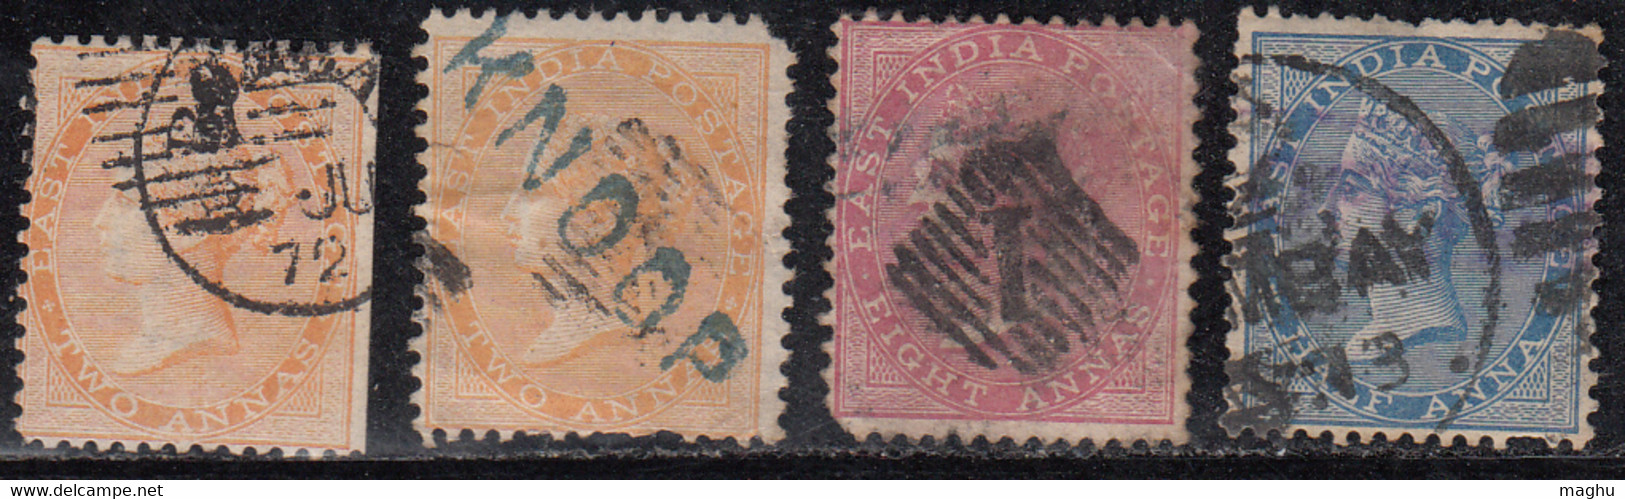 4 Diff., BOMBAY Cancellation, JC Tpye 4 And Local Varities On QV British East India Used, (stamps Damaged) - 1854 Britische Indien-Kompanie